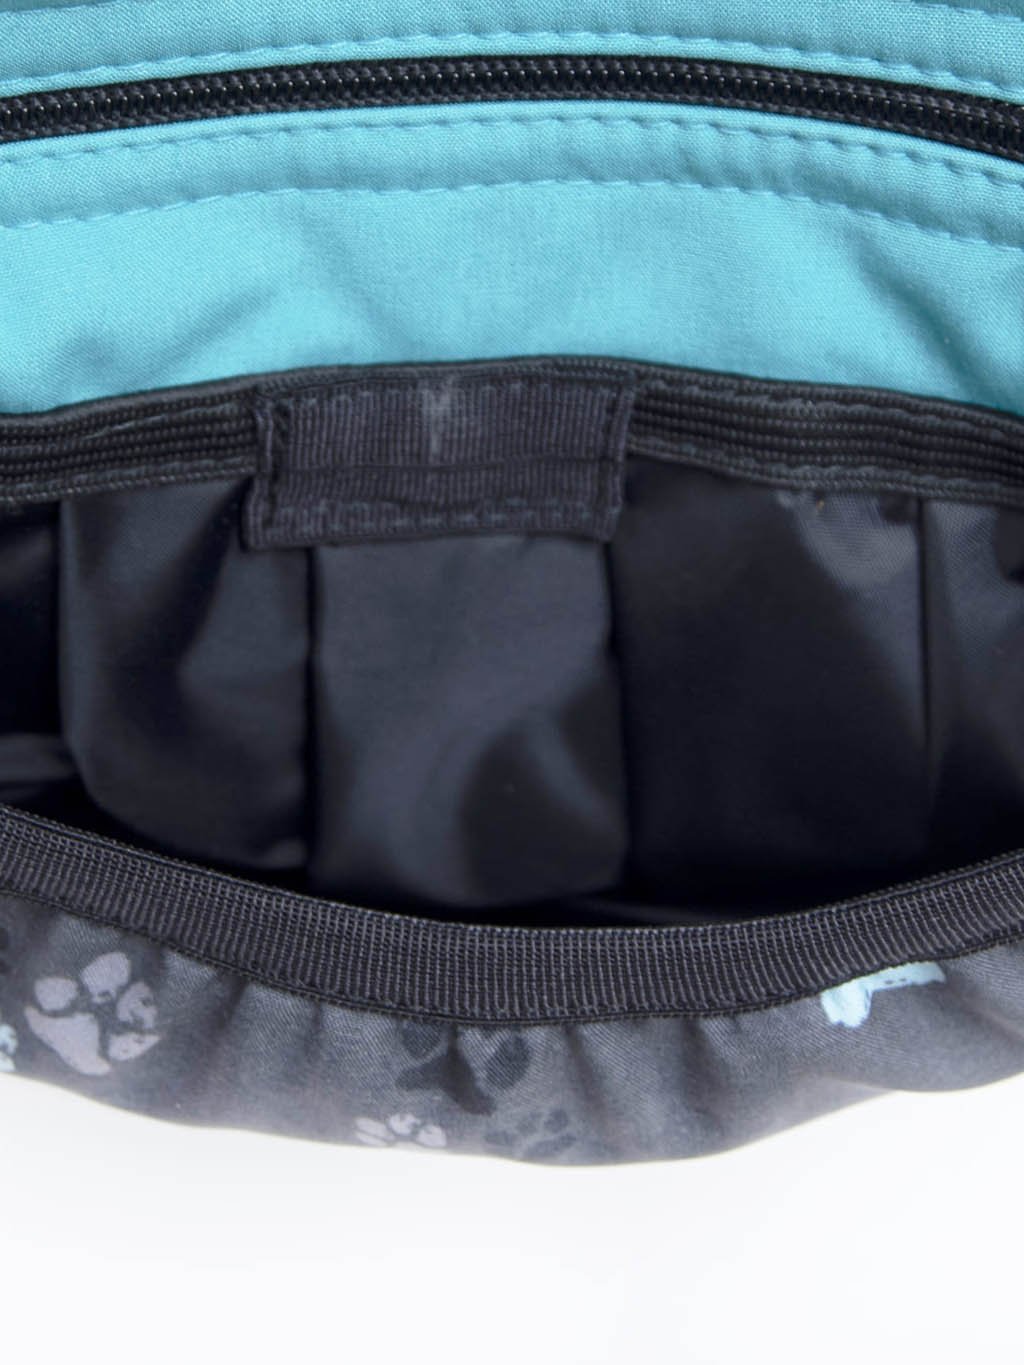 Dog training treat bum bag with magnetic fastening, Turquoise No. 1